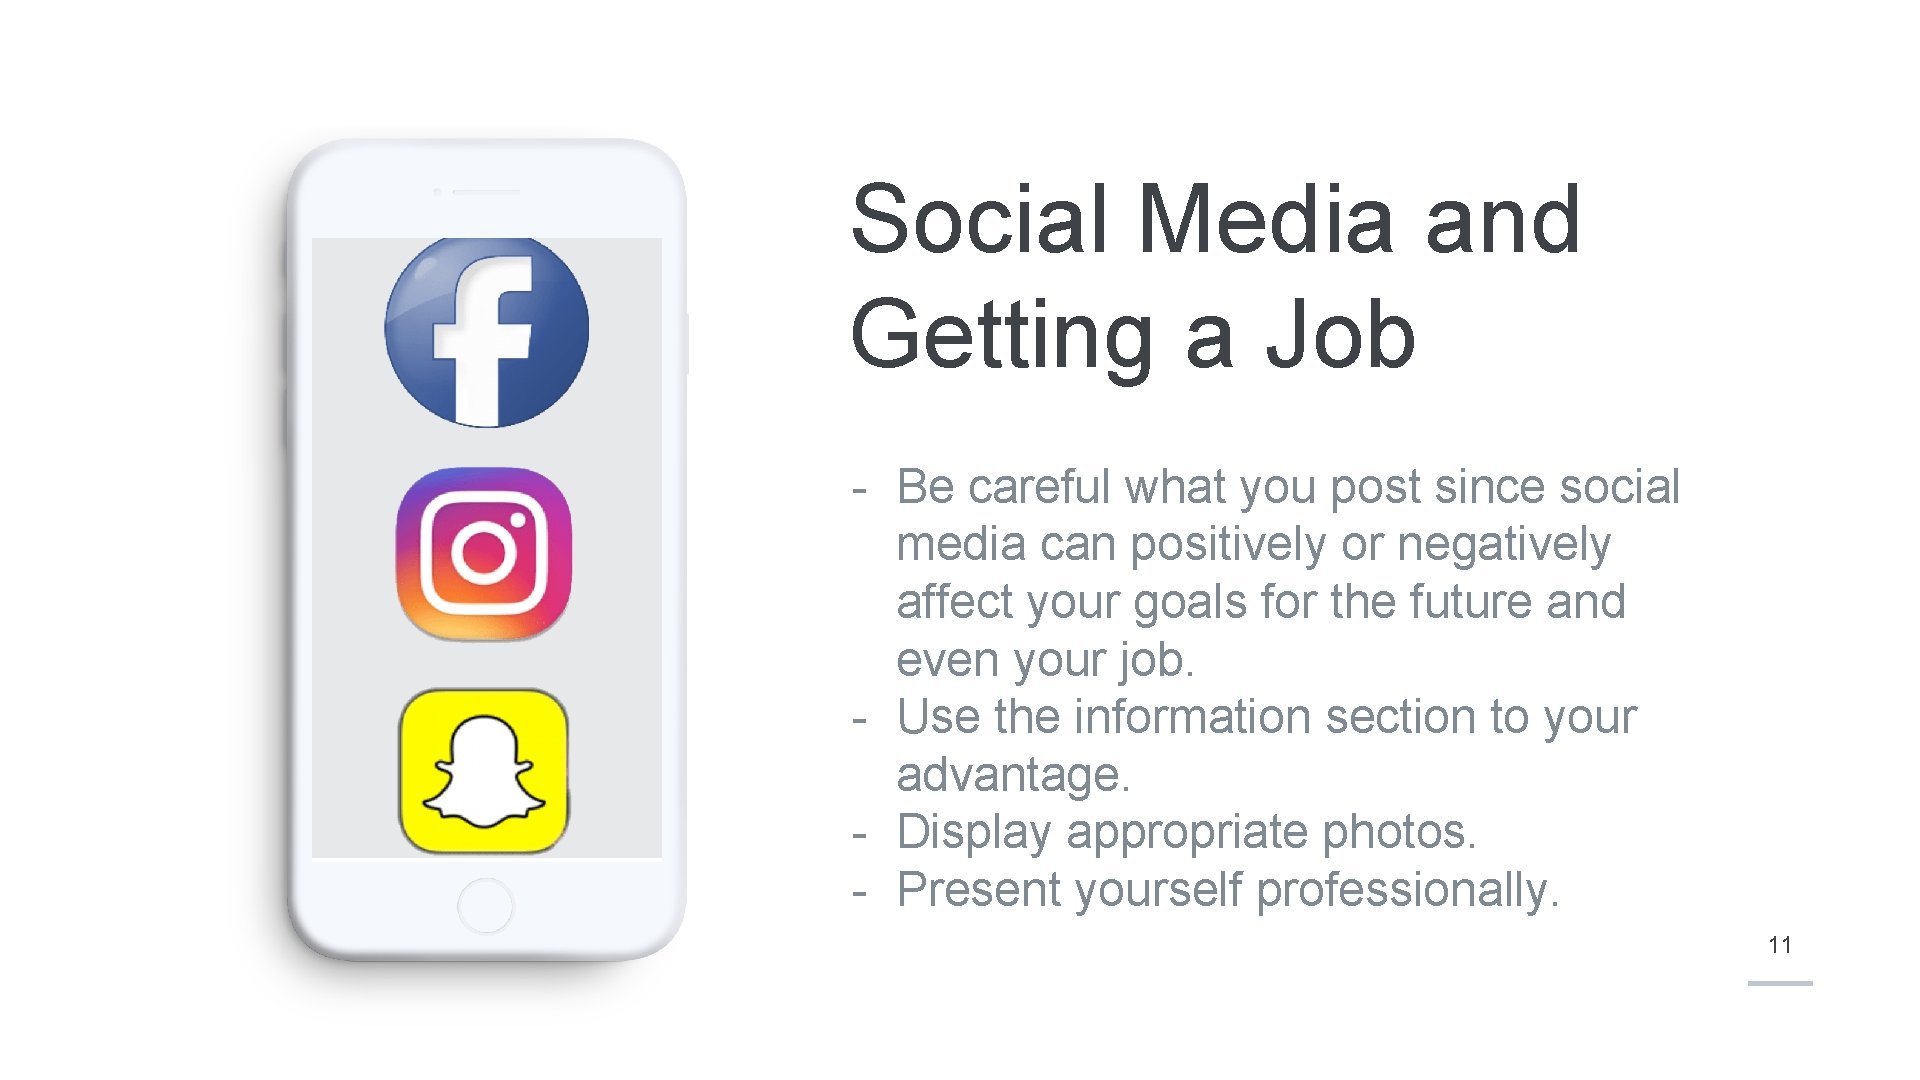 Social Media and Getting a Job - Be careful what you post since social